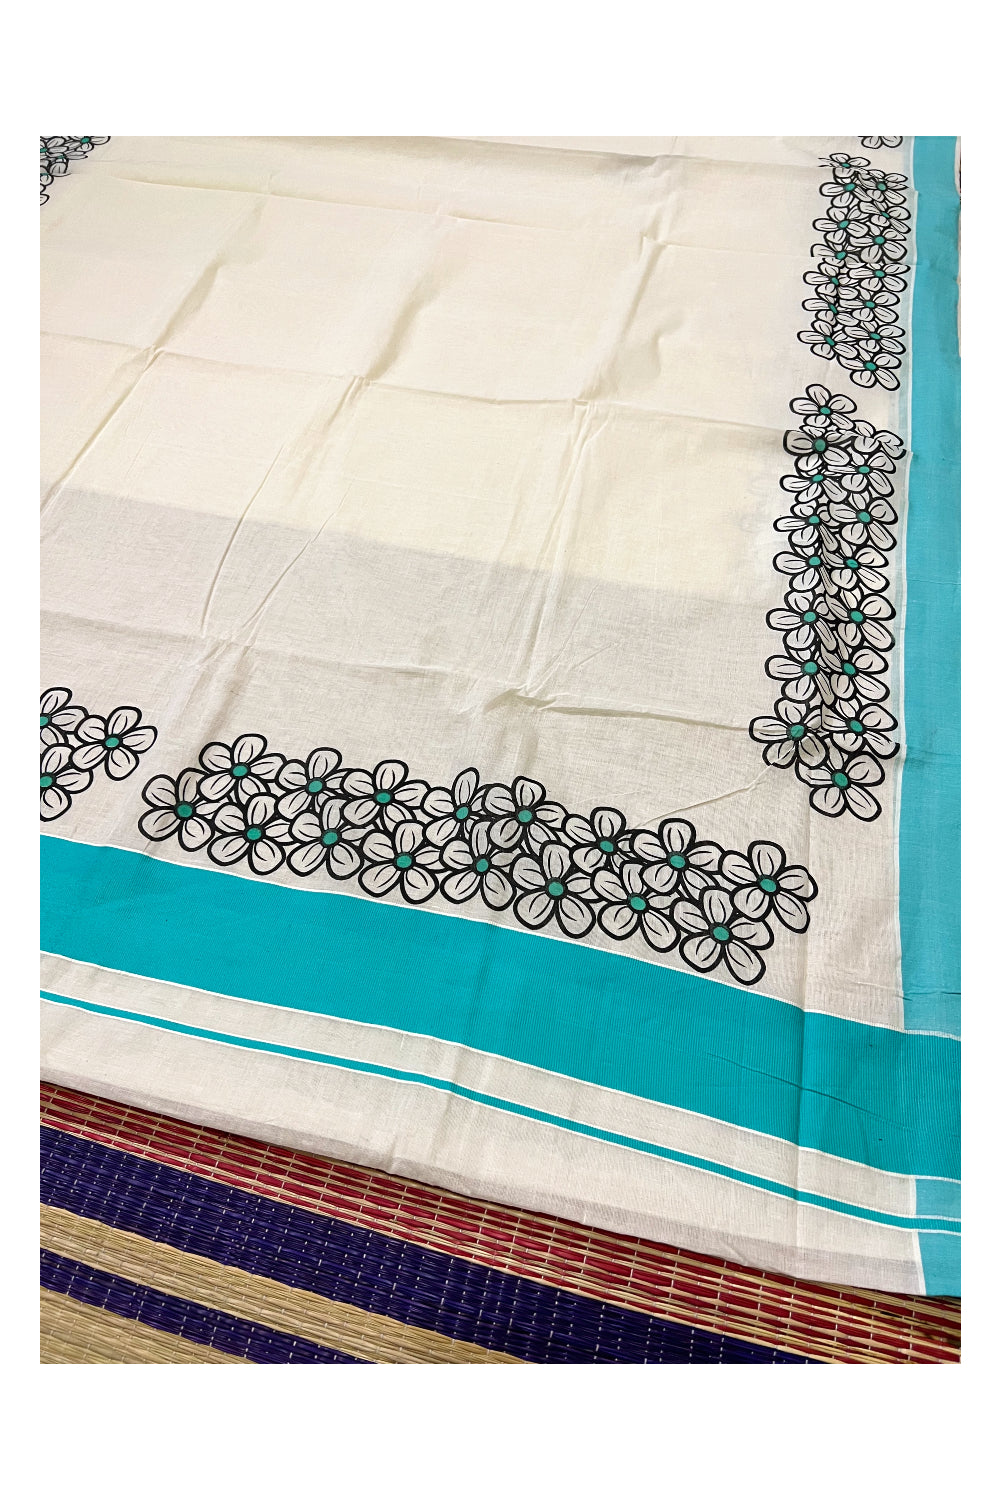 Southloom Onam 2022 Kerala Saree with Black Floral Block Prints and Turquoise Border